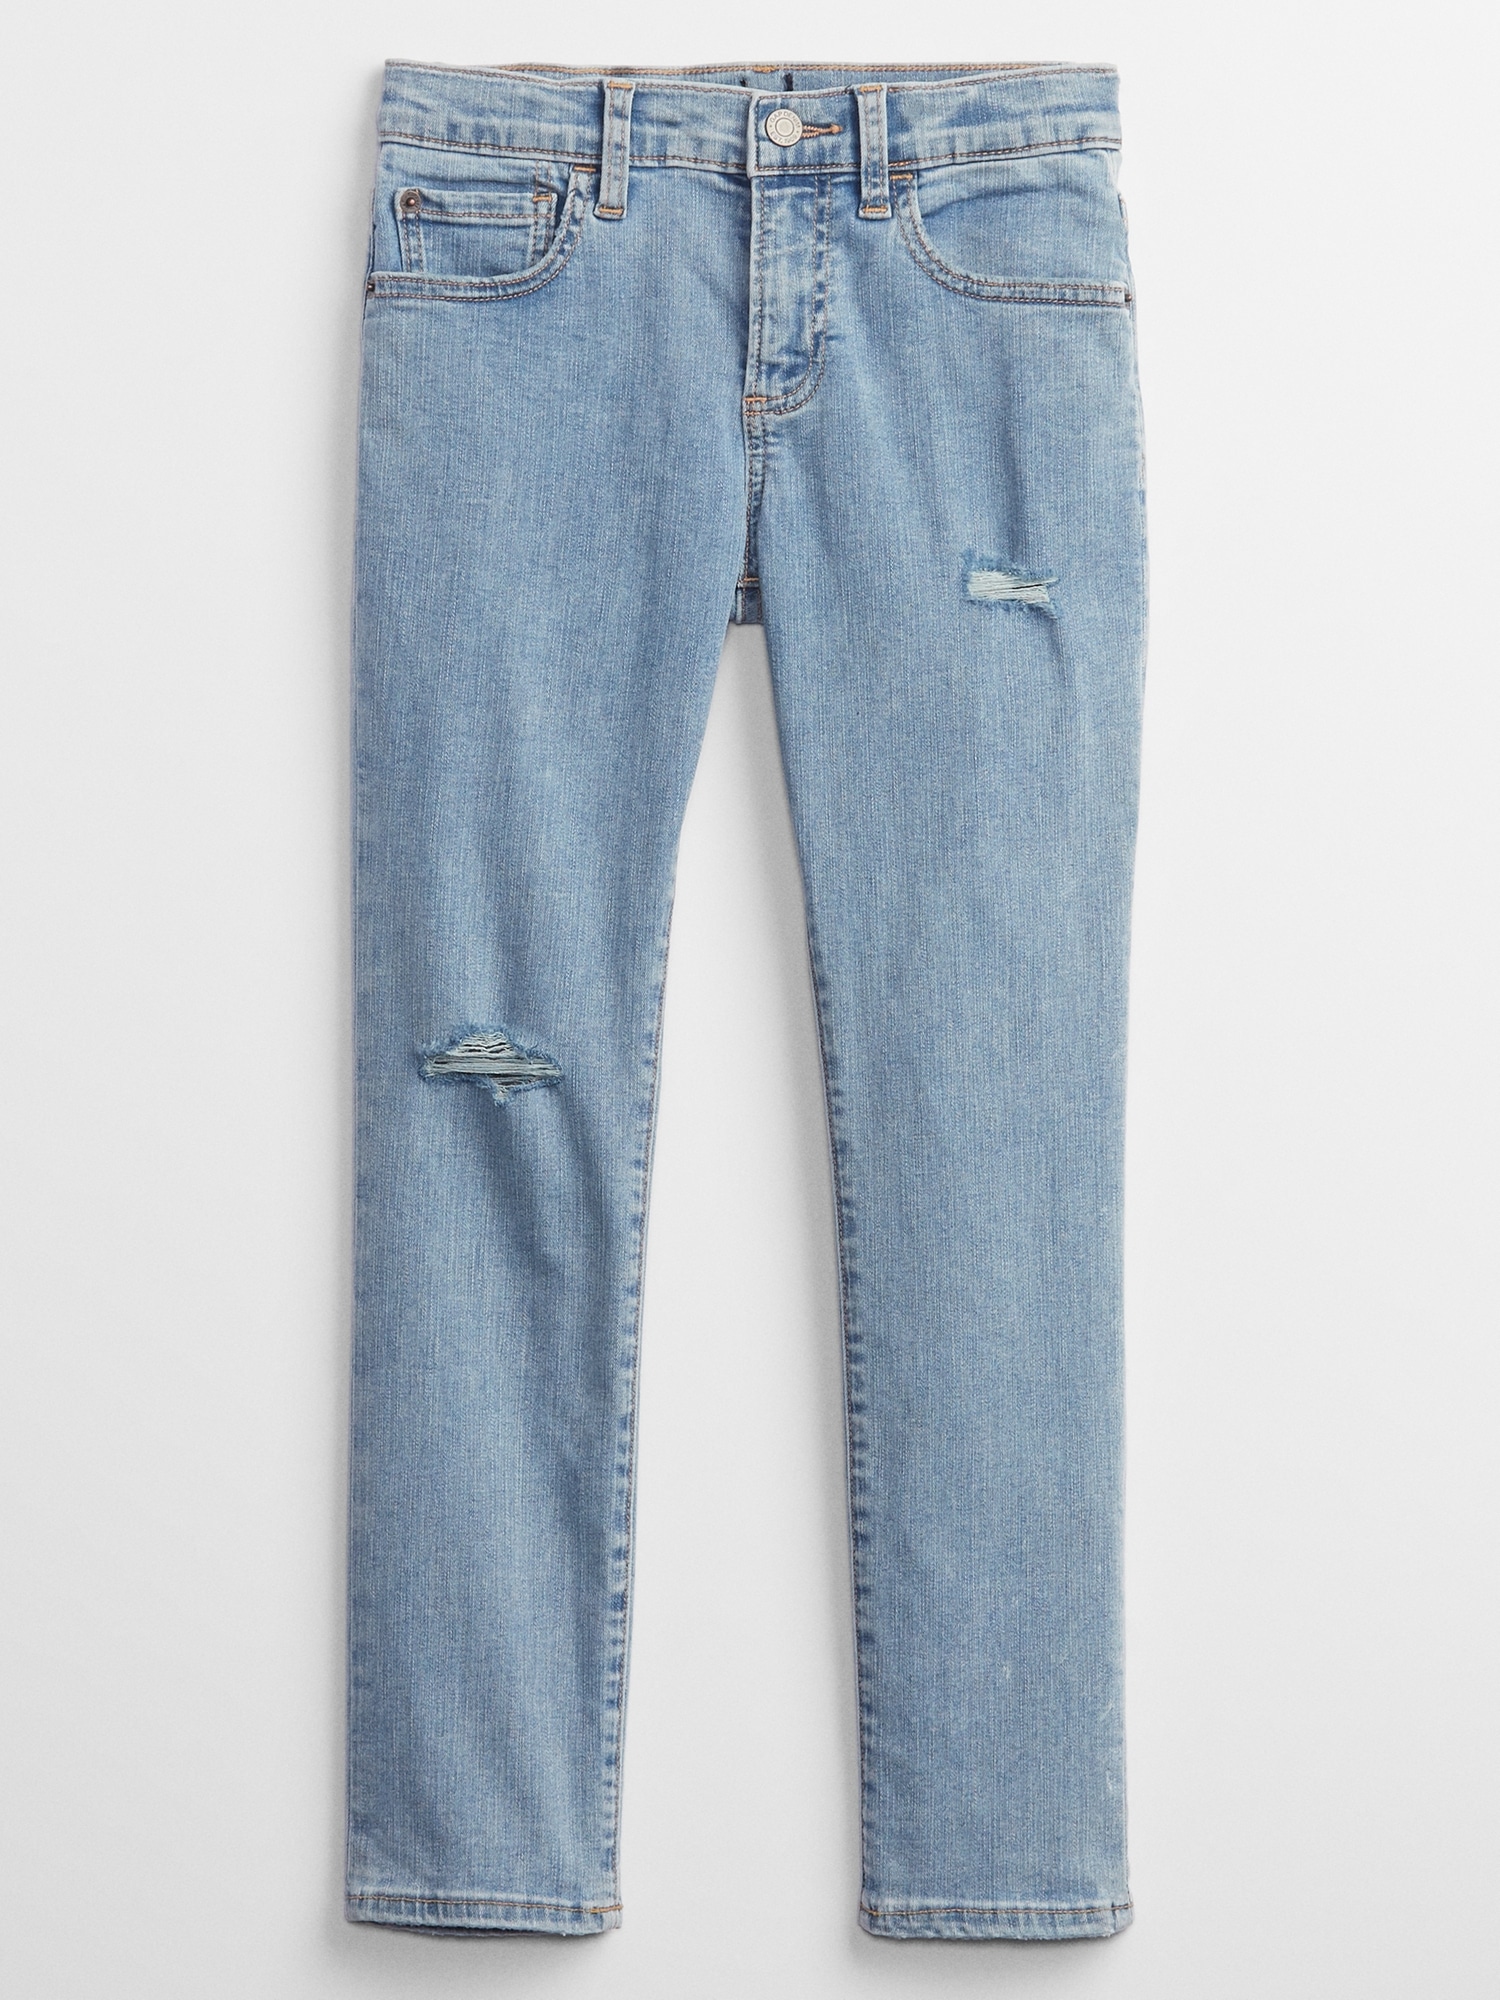 Gap Factory Kids Skinny Jeans with Washwell